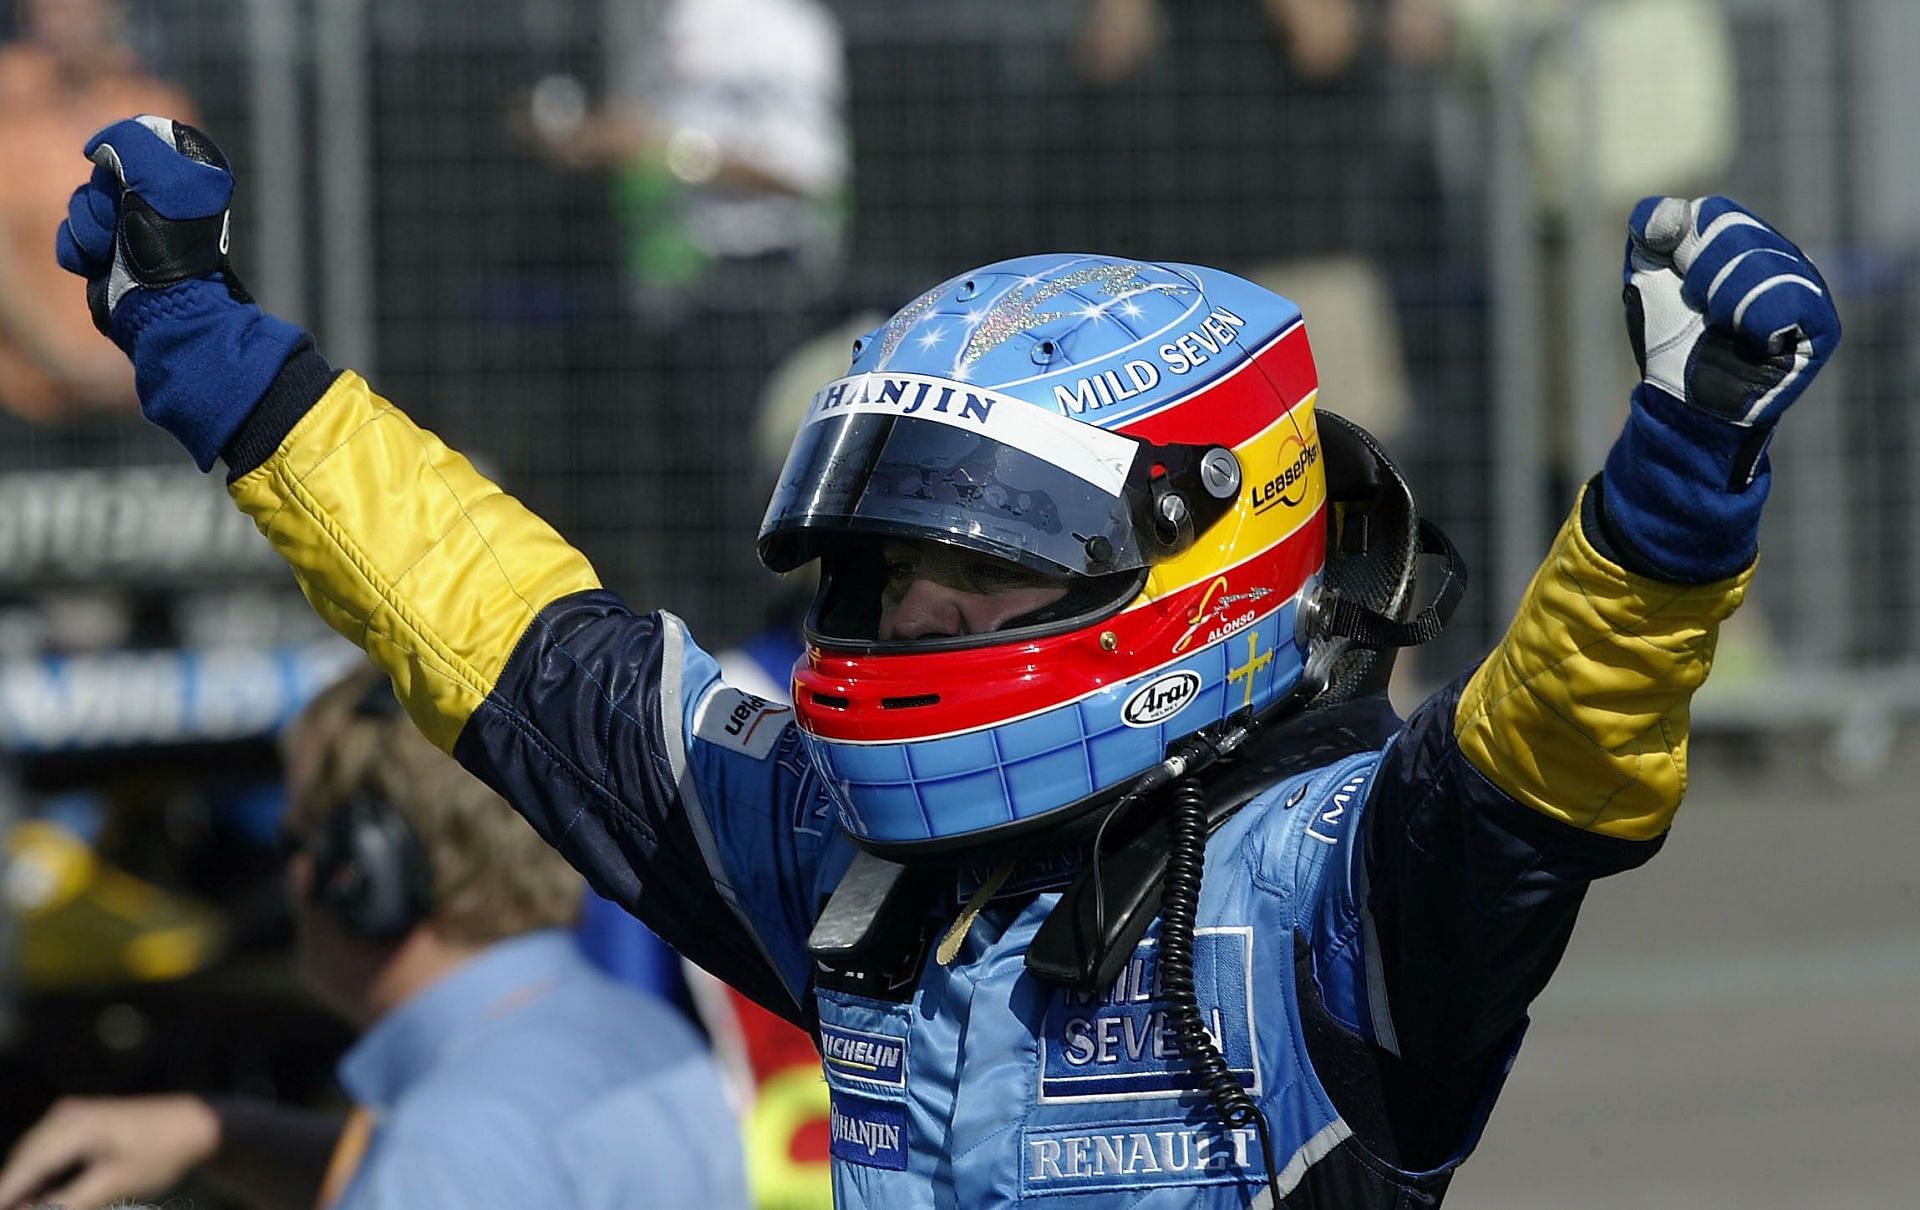 Fernando Alonso at the 2003 Hungarian GP in Budapest (Photo by Bryn Lennon/Getty Images)